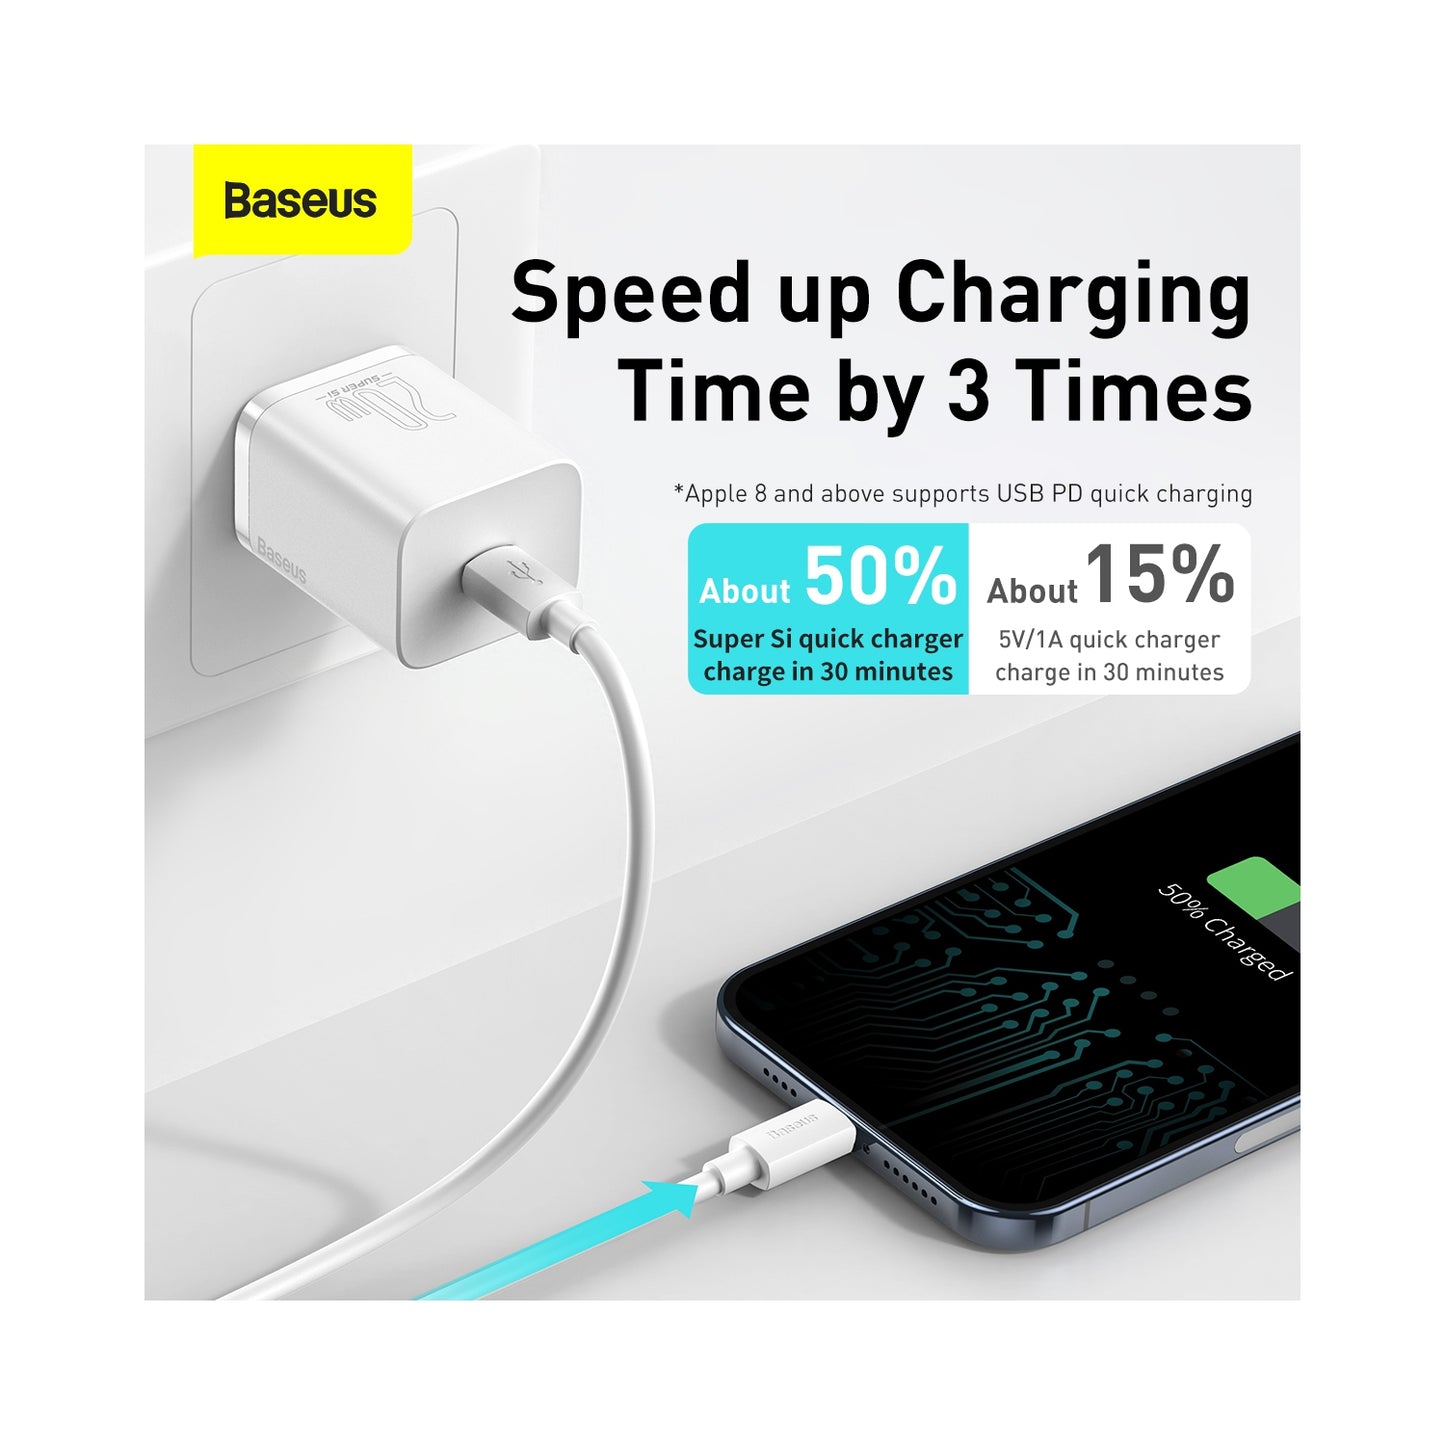 Baseus Super Si uick Charger 20W Adapter comes with USB-C to Lightning Cable